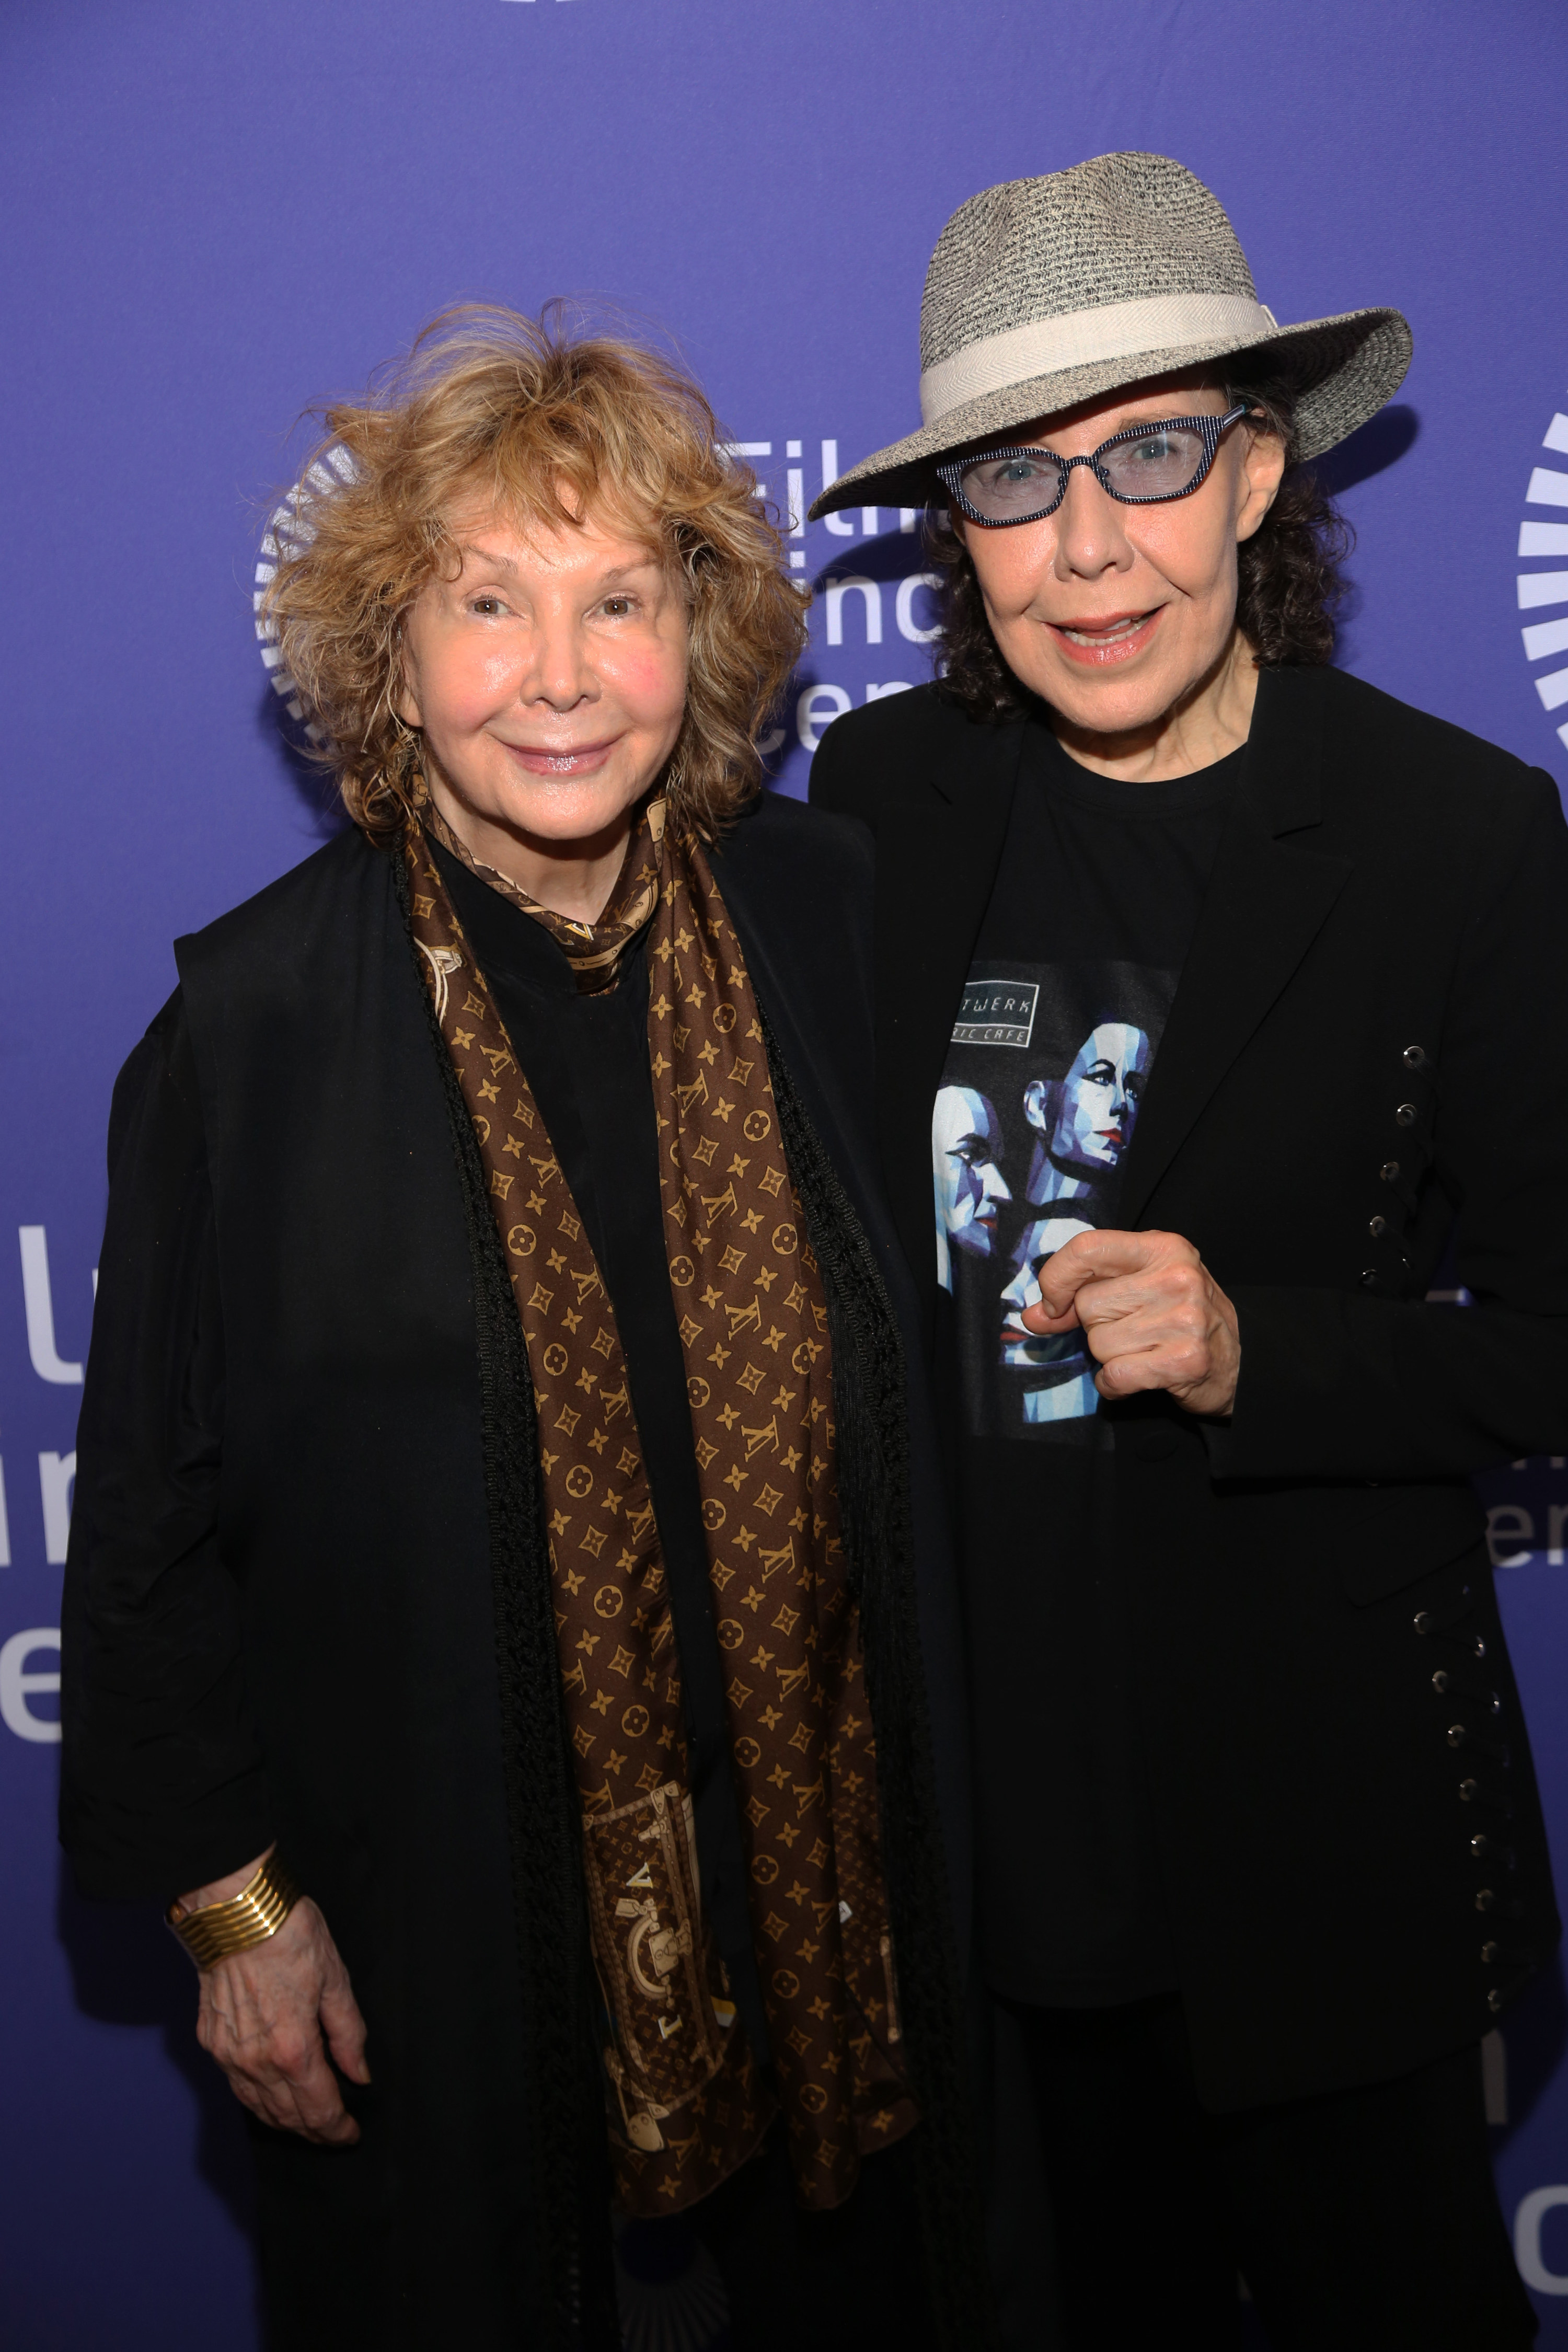 Jane Wagner and Lily Tomlin at an event